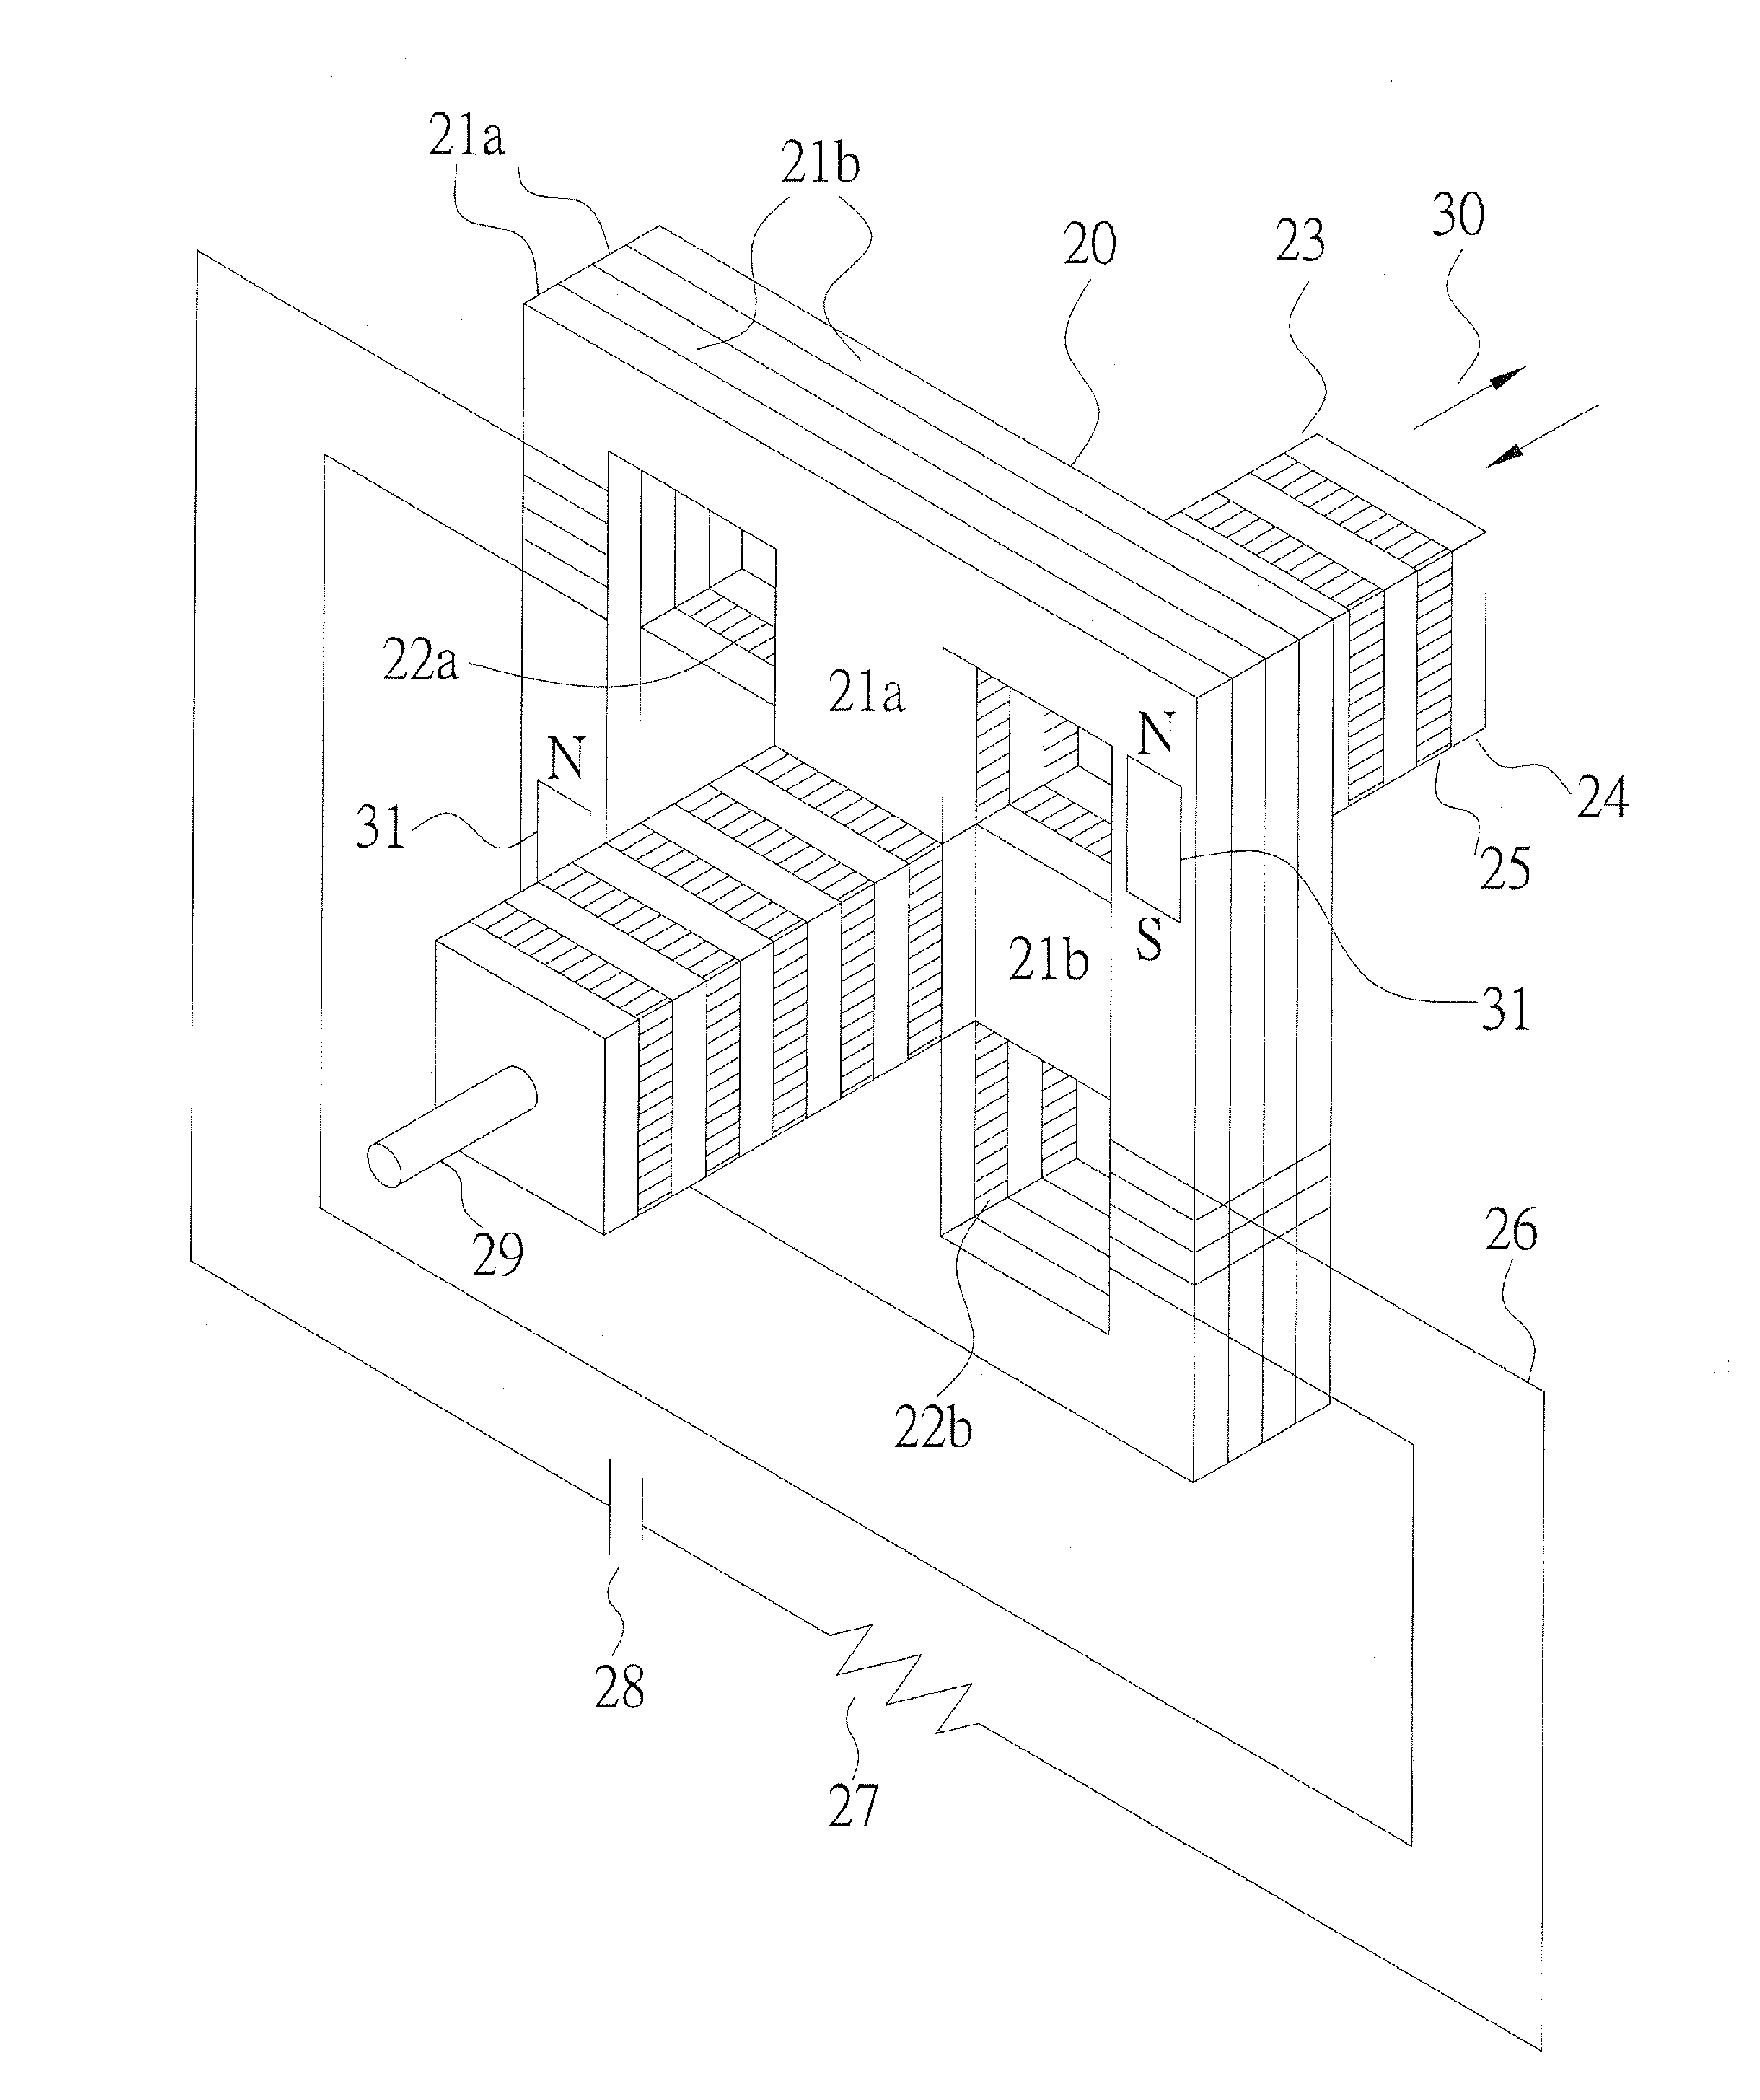 Power generator with high power-to-volume ratio